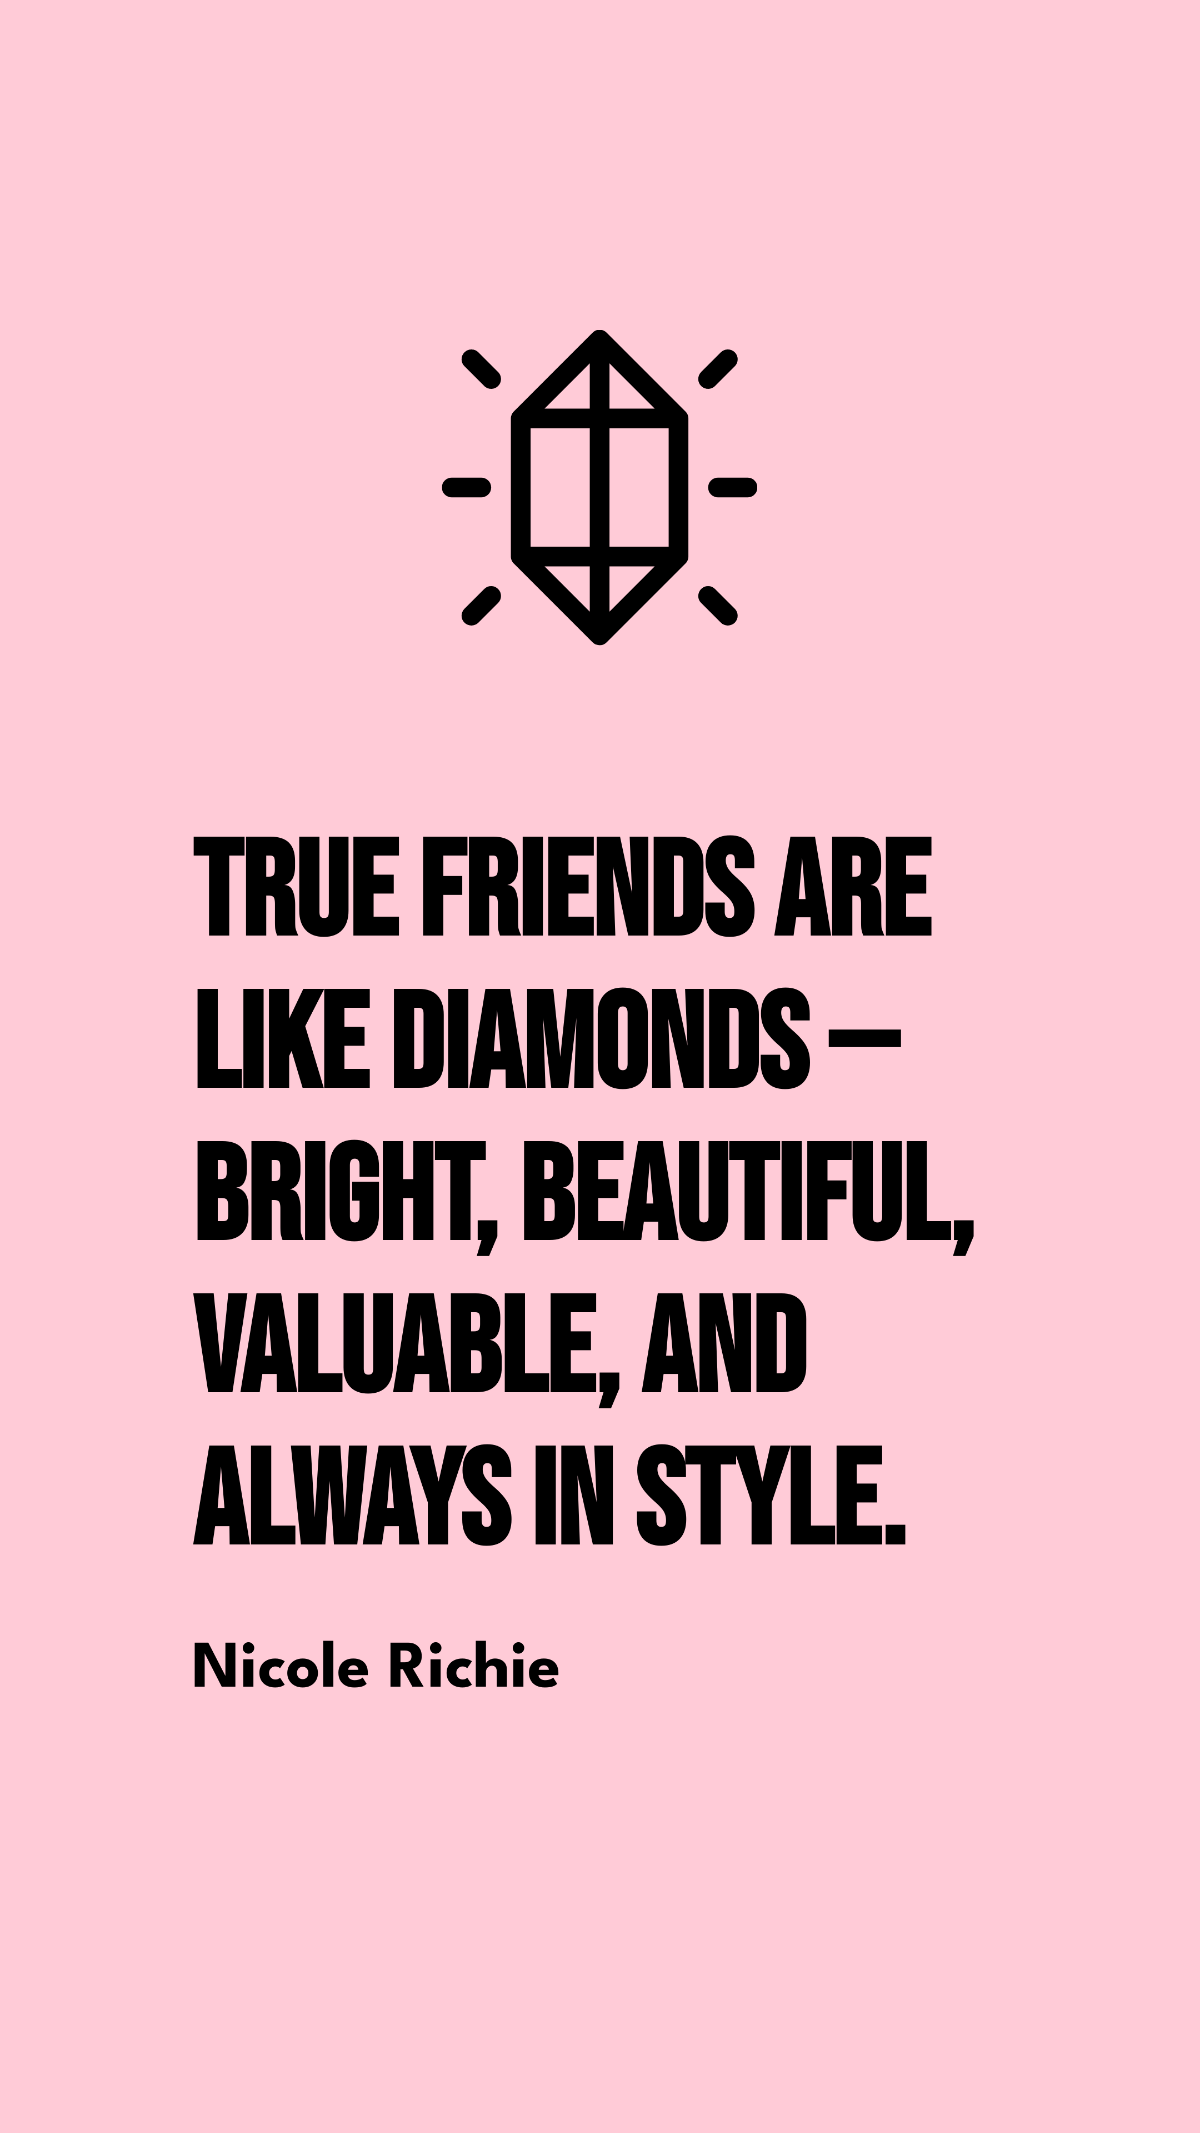 Nicole Richie - True friends are like diamonds — bright, beautiful, valuable, and always in style. Template